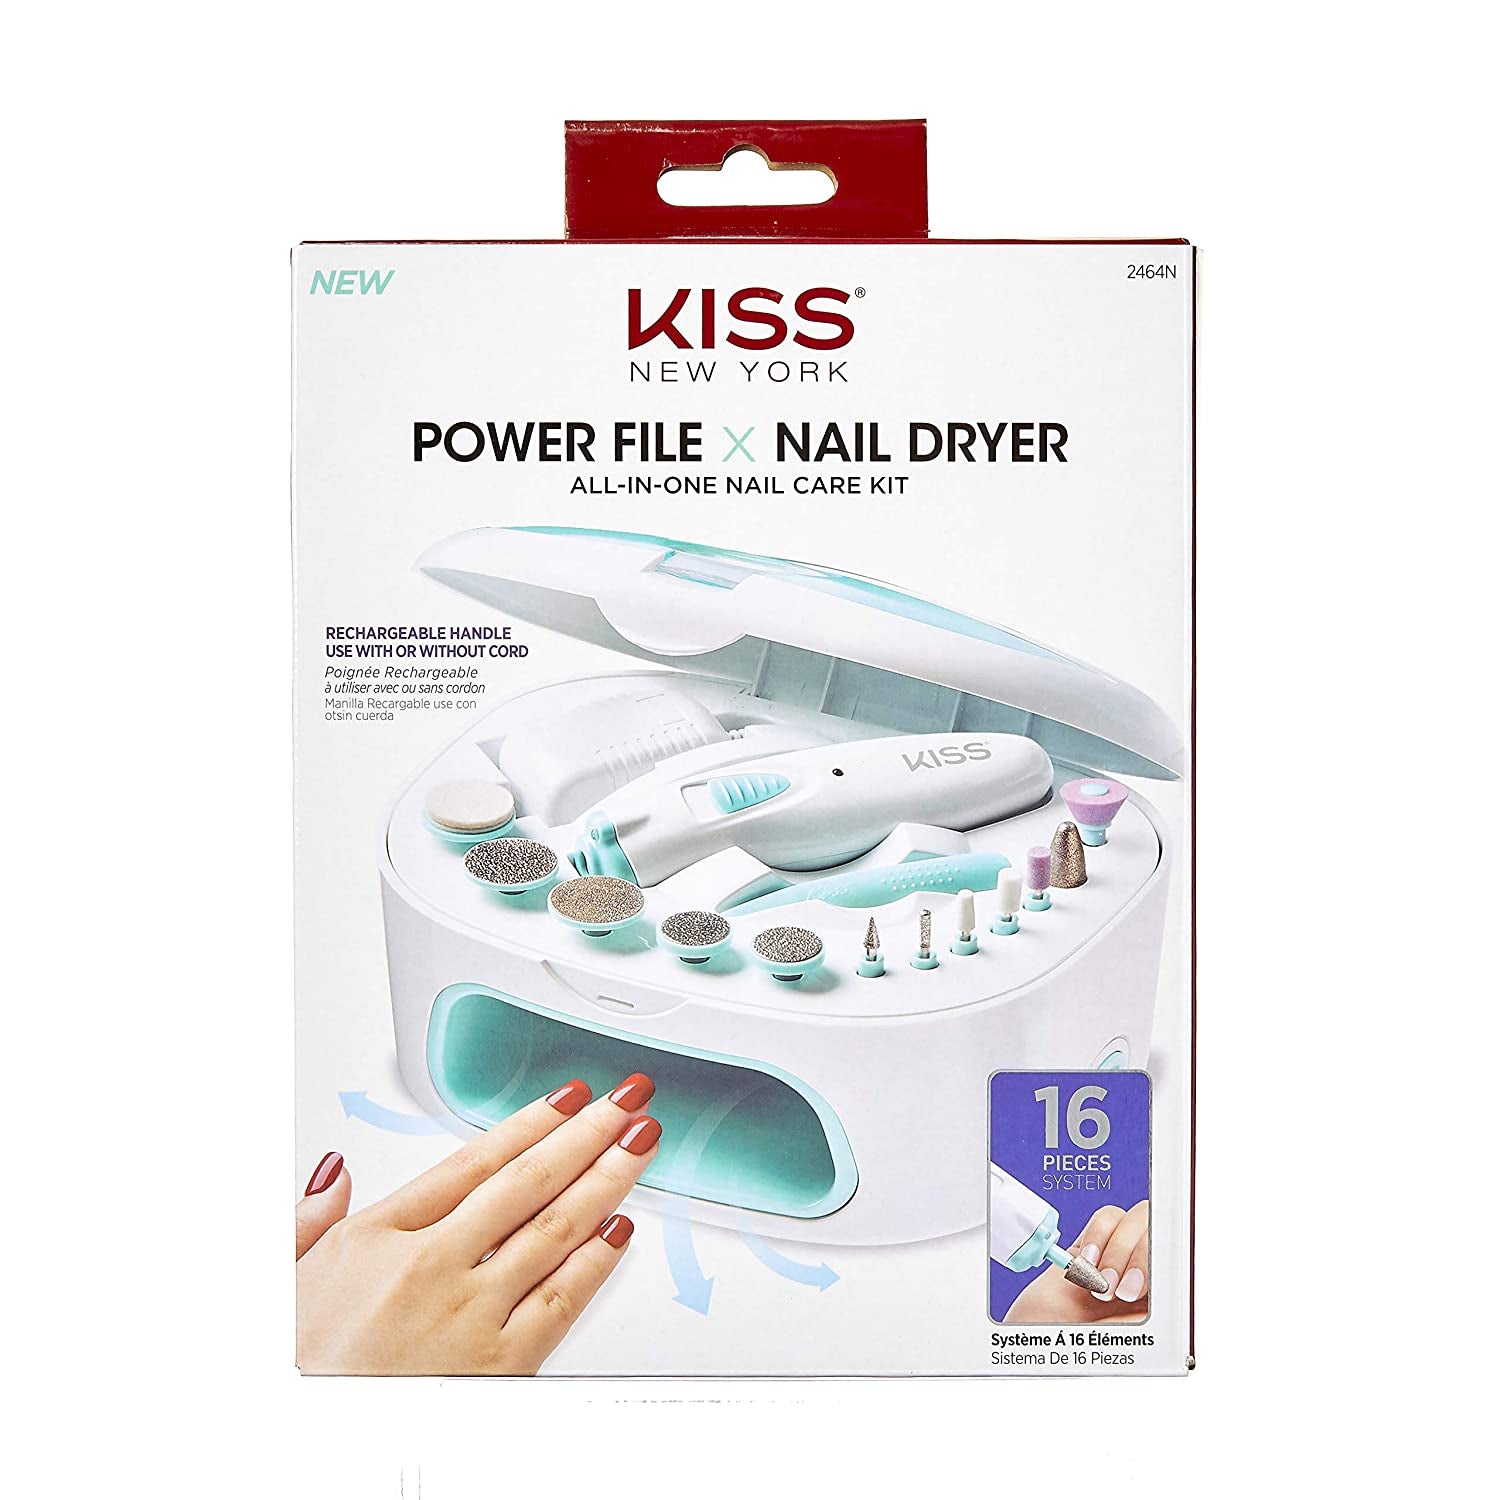 Power File X Nail Dryer All-In-One Nail Care Kit, Cordless Rechargeable Handle, Salon Style Nail Dryer, 12 Interchangeable Styling Attachments, Ergonomic Design, Storage Case, 16 Pcs., 1.14 Lbs.